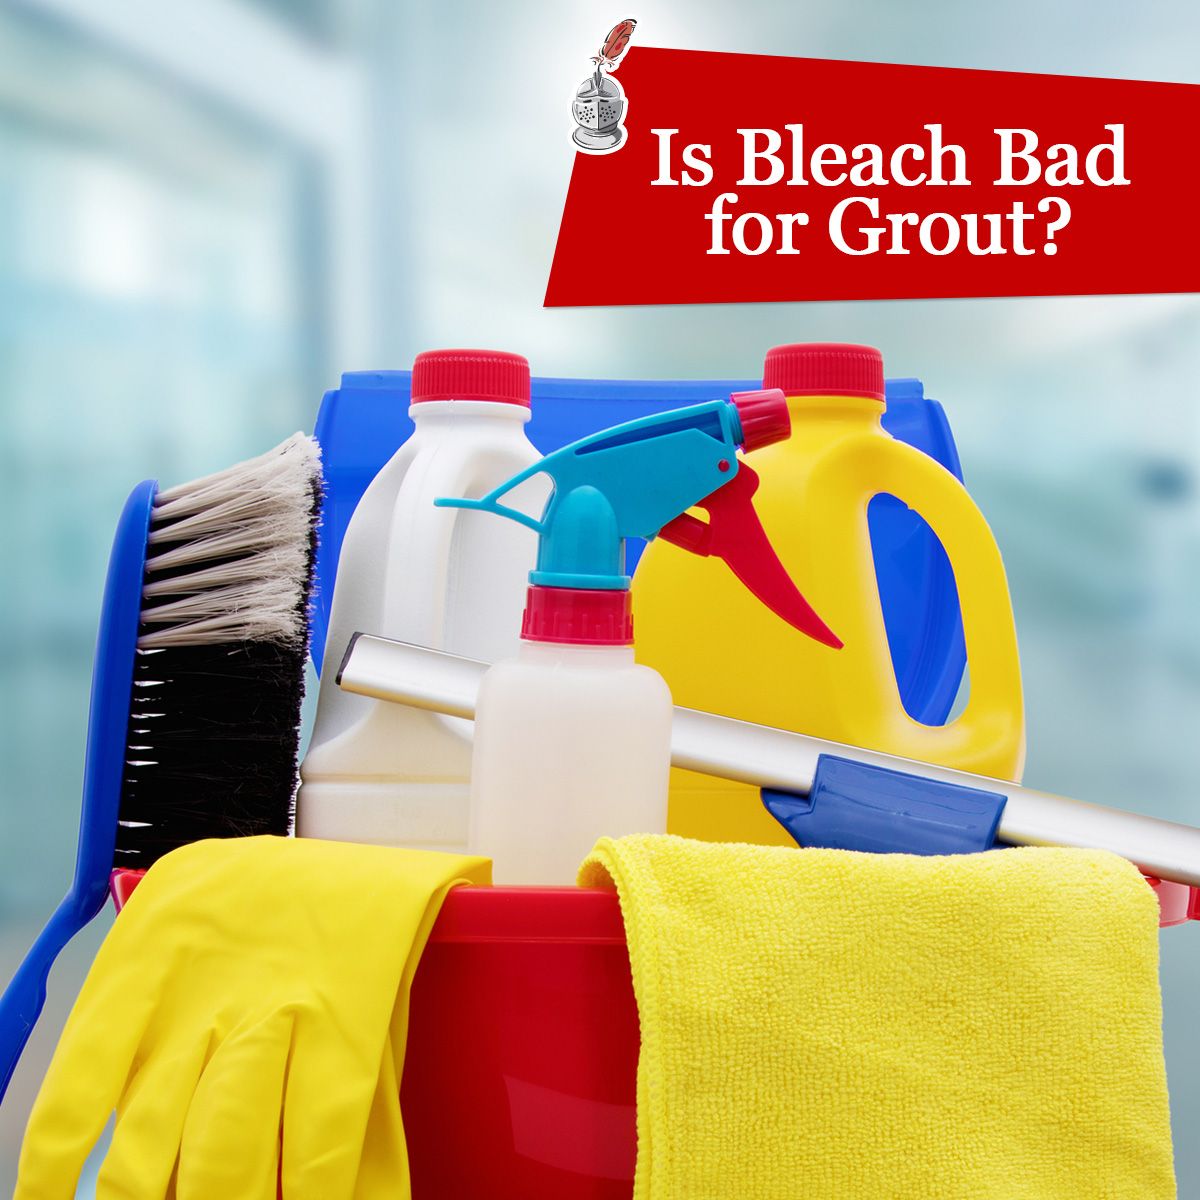 Is Bleach Bad for Grout?